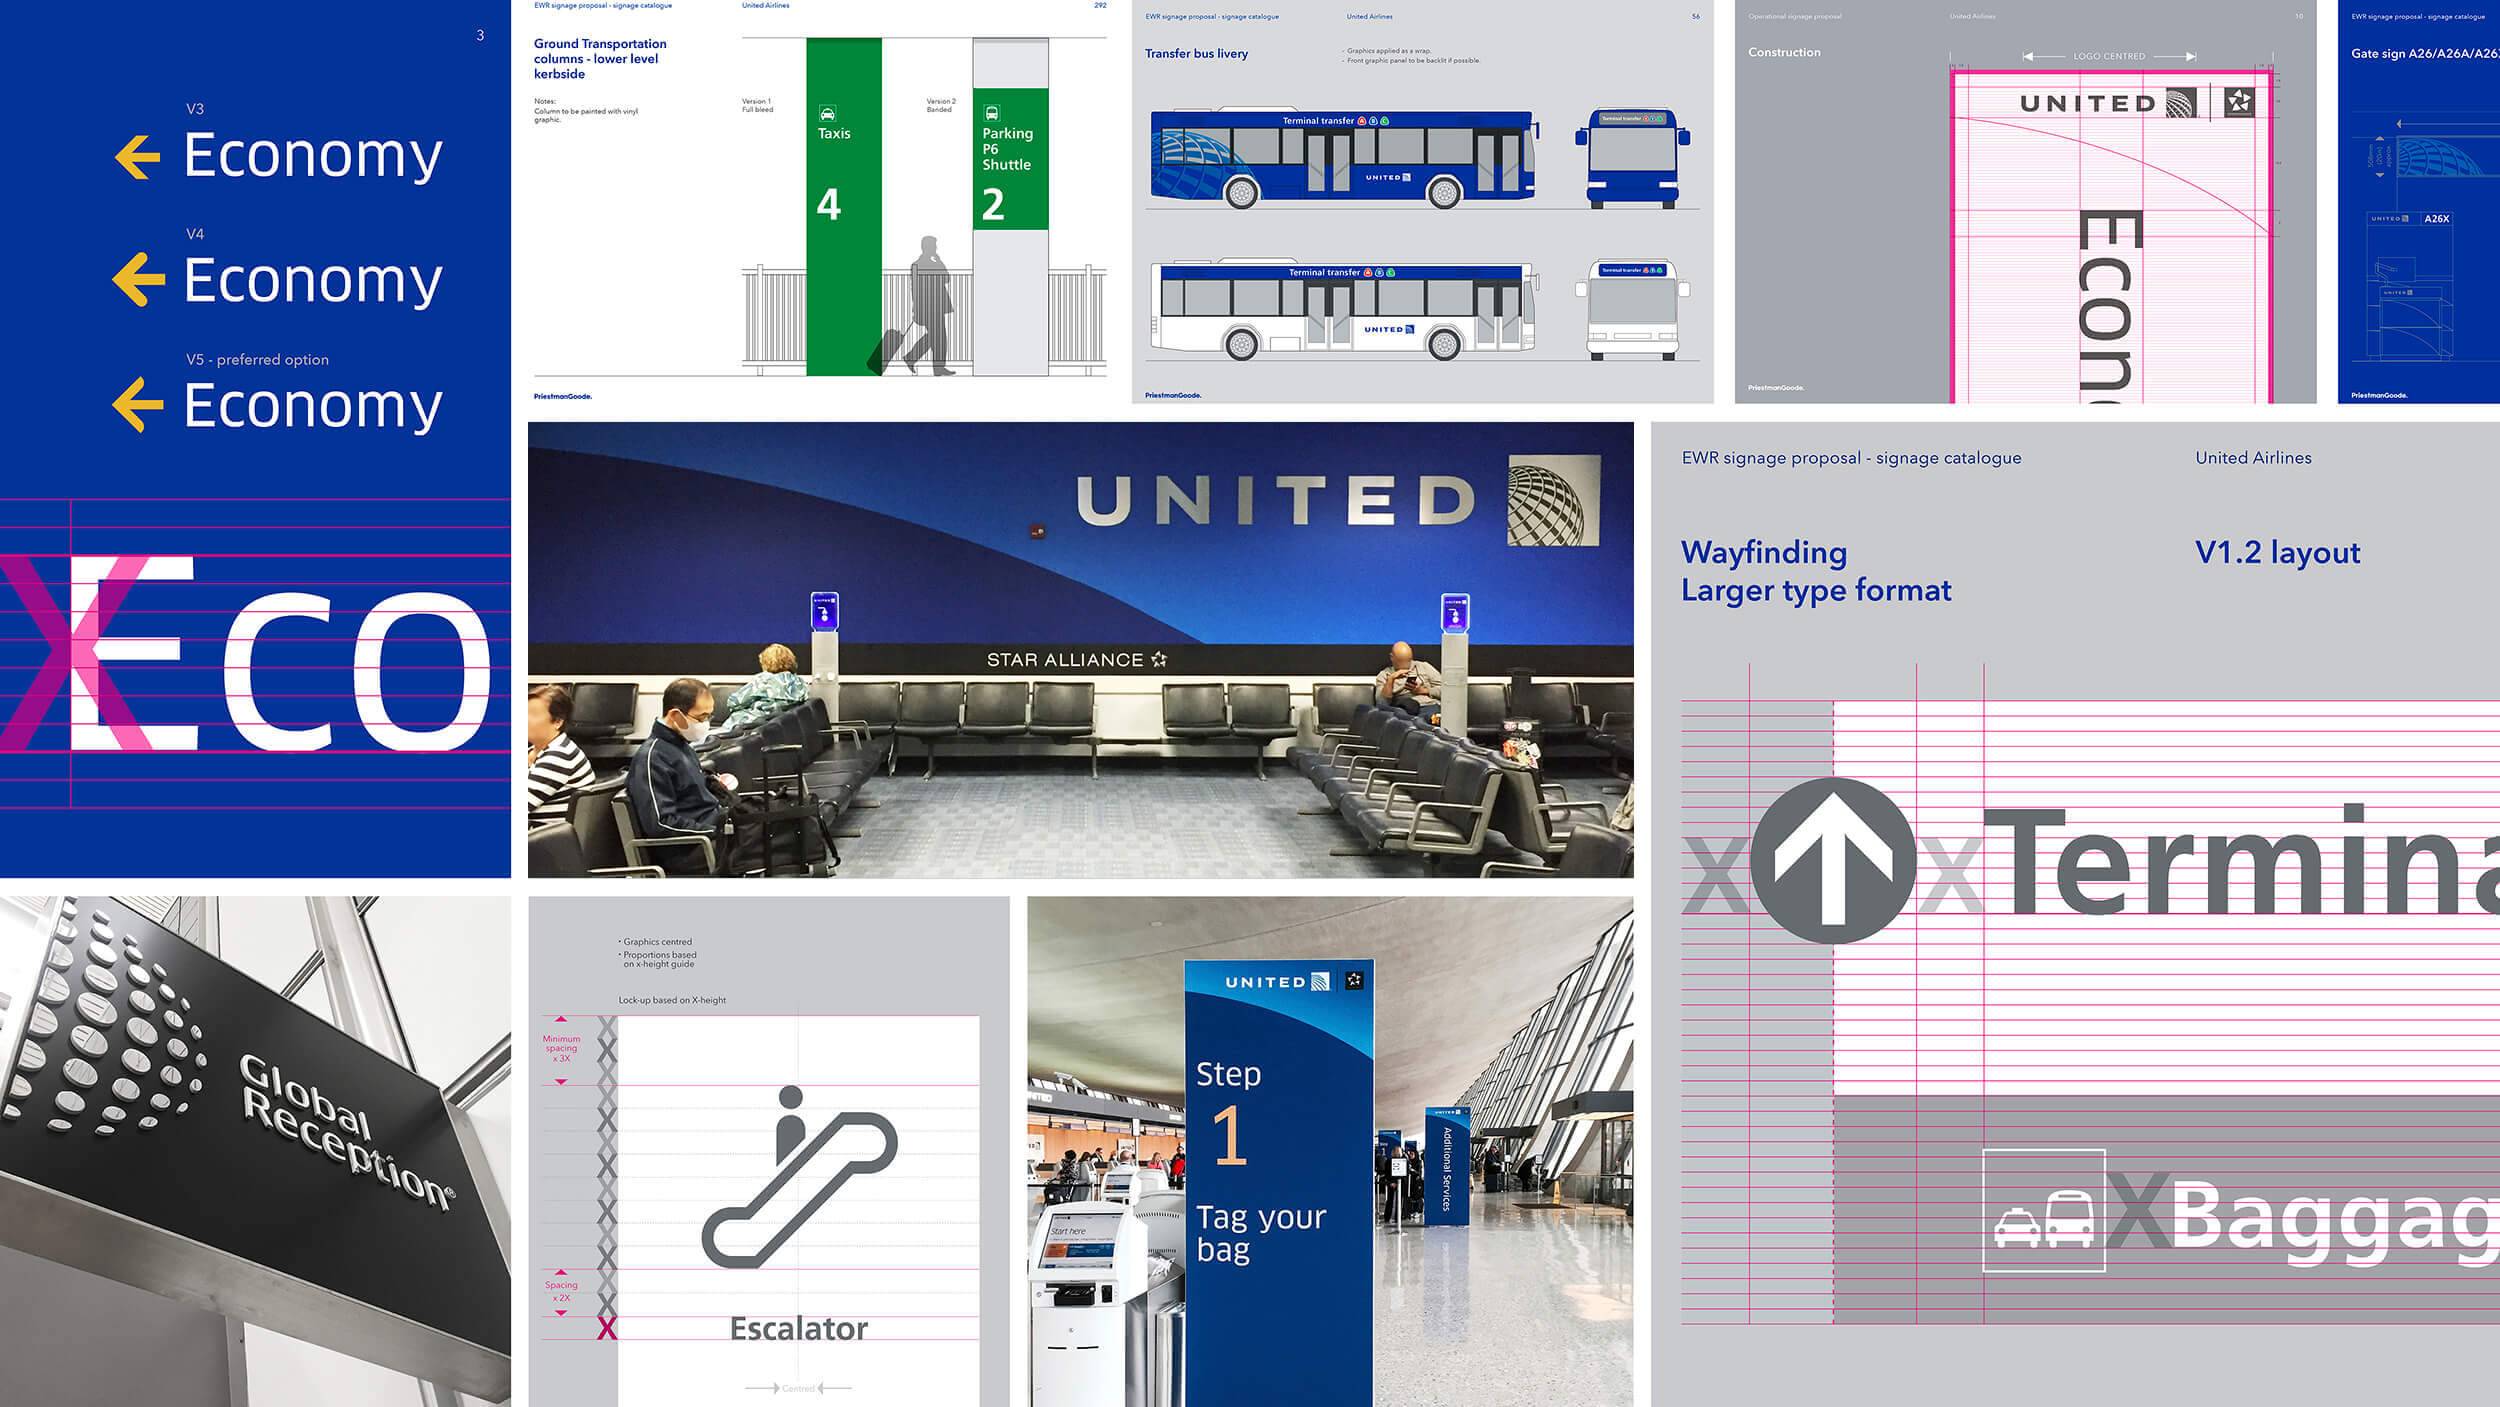 Signage guidelines for United Airlines